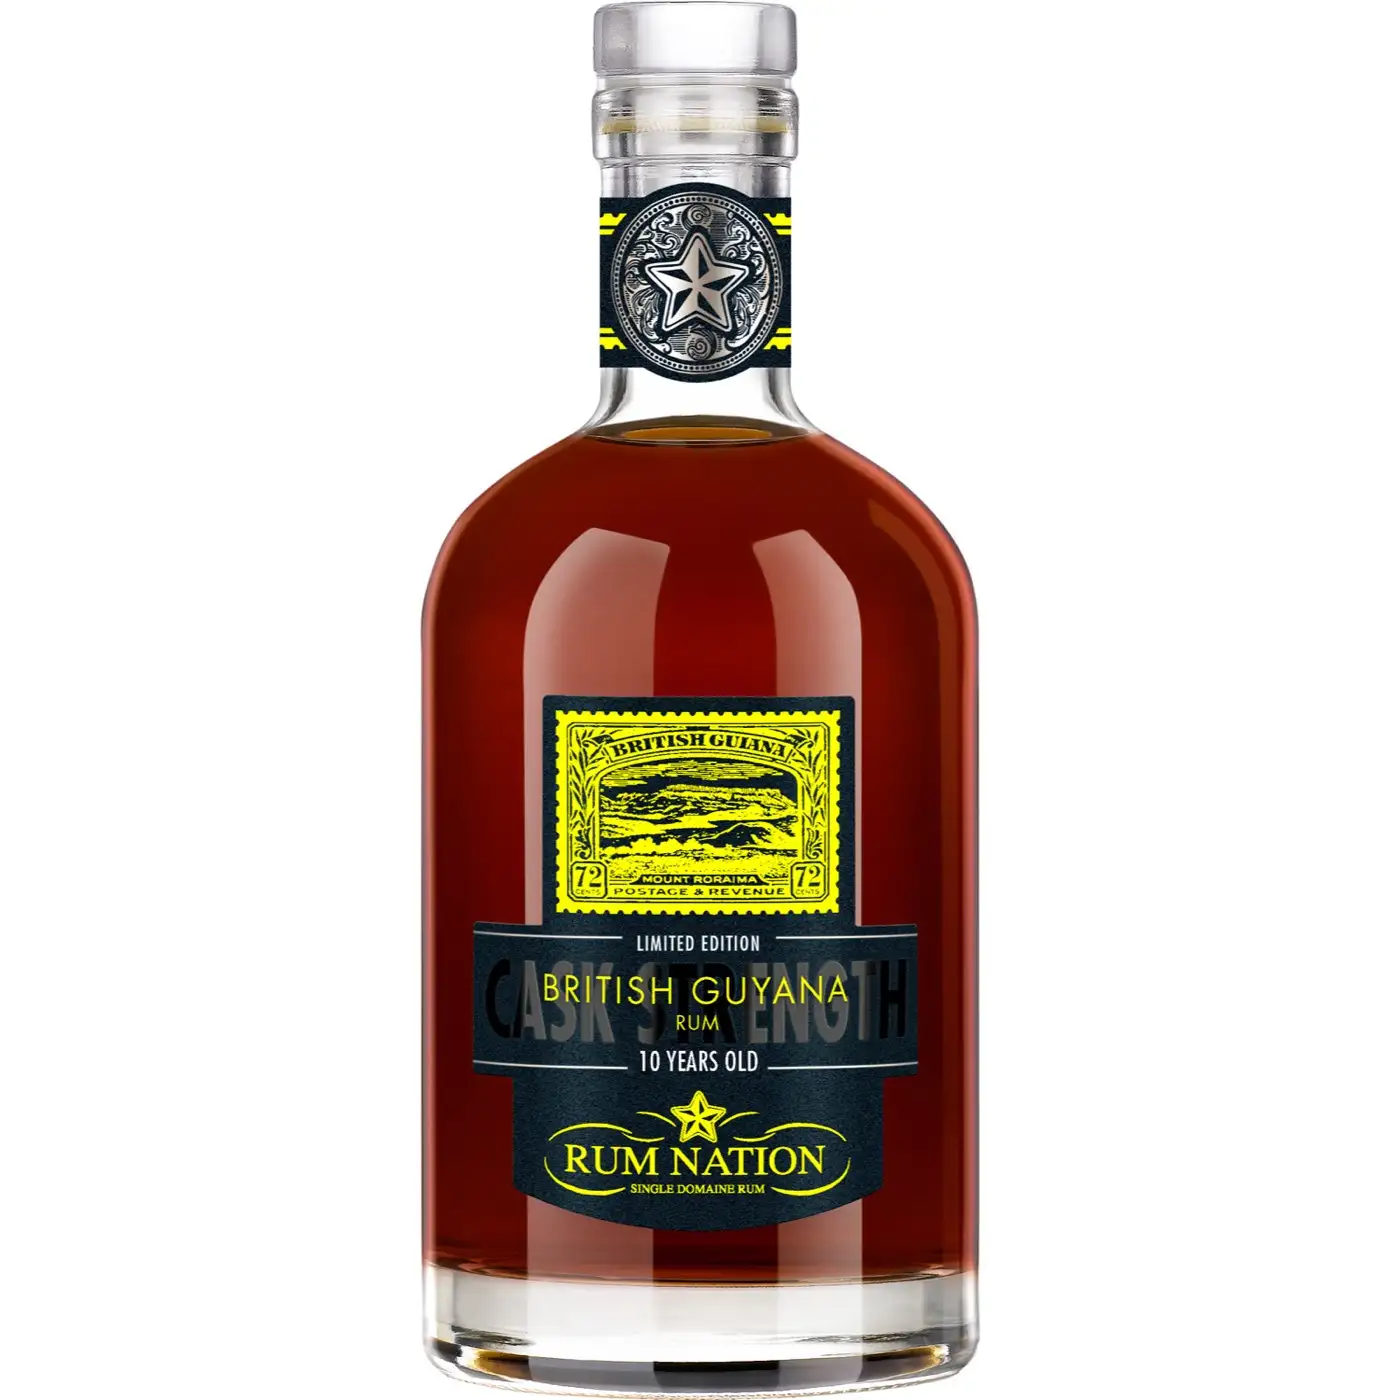 Image of the front of the bottle of the rum British Guyana Limited Edition